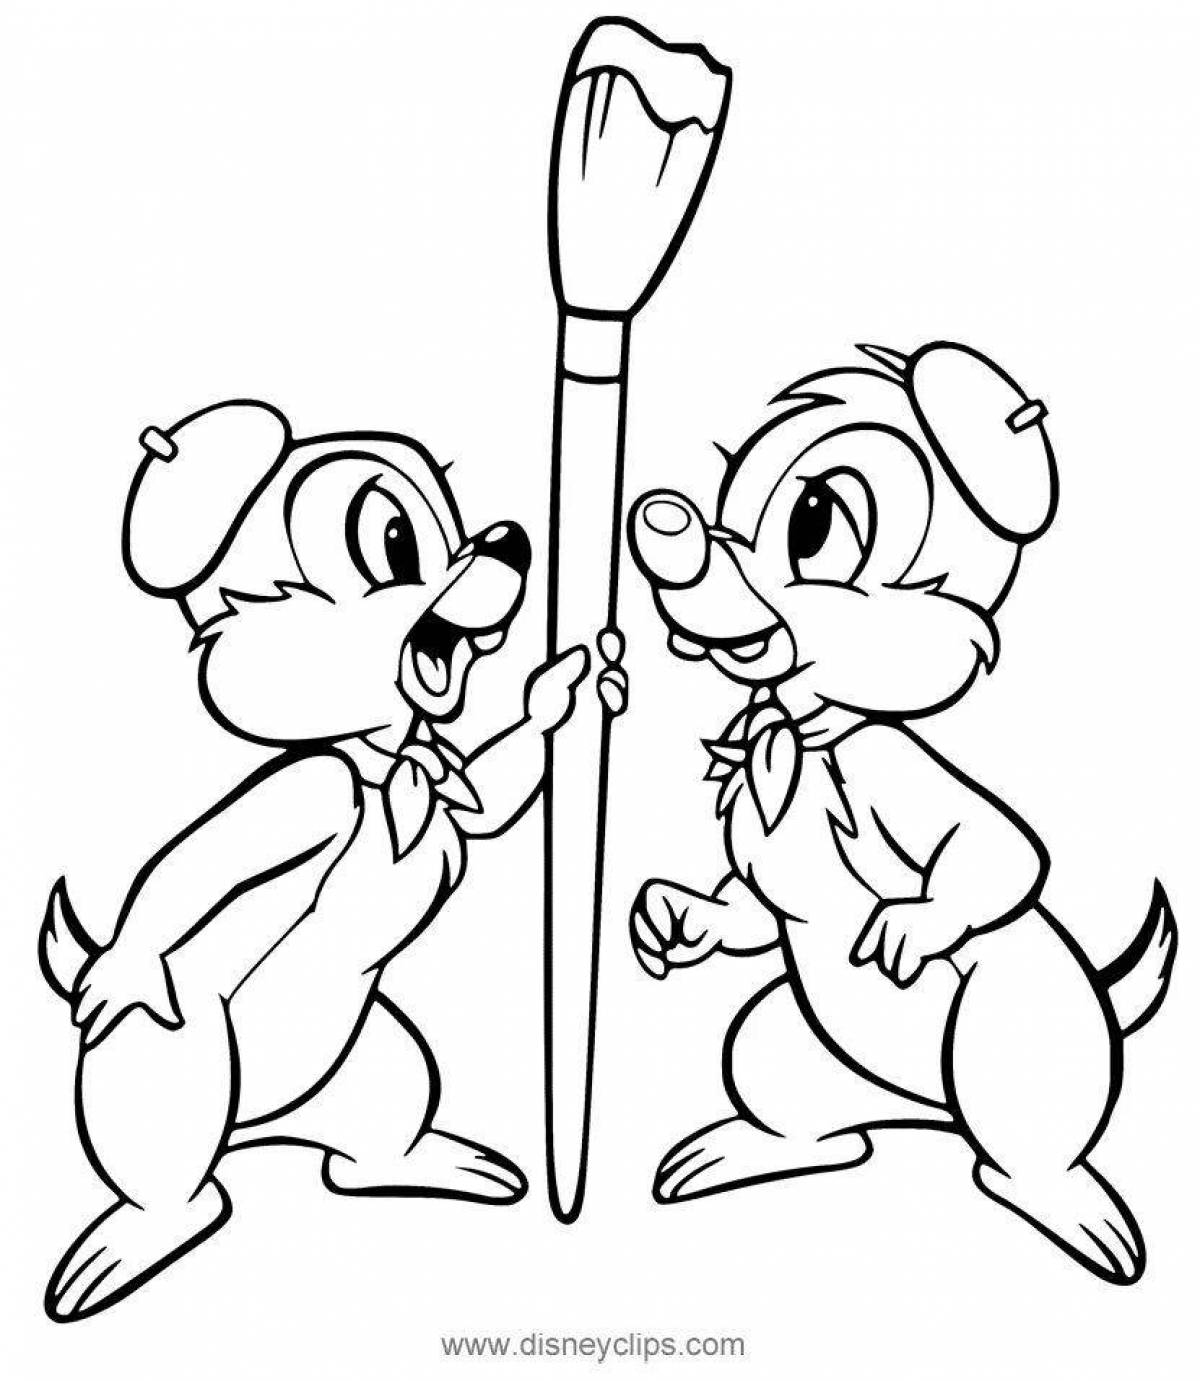 Wonderful chip and dale coloring